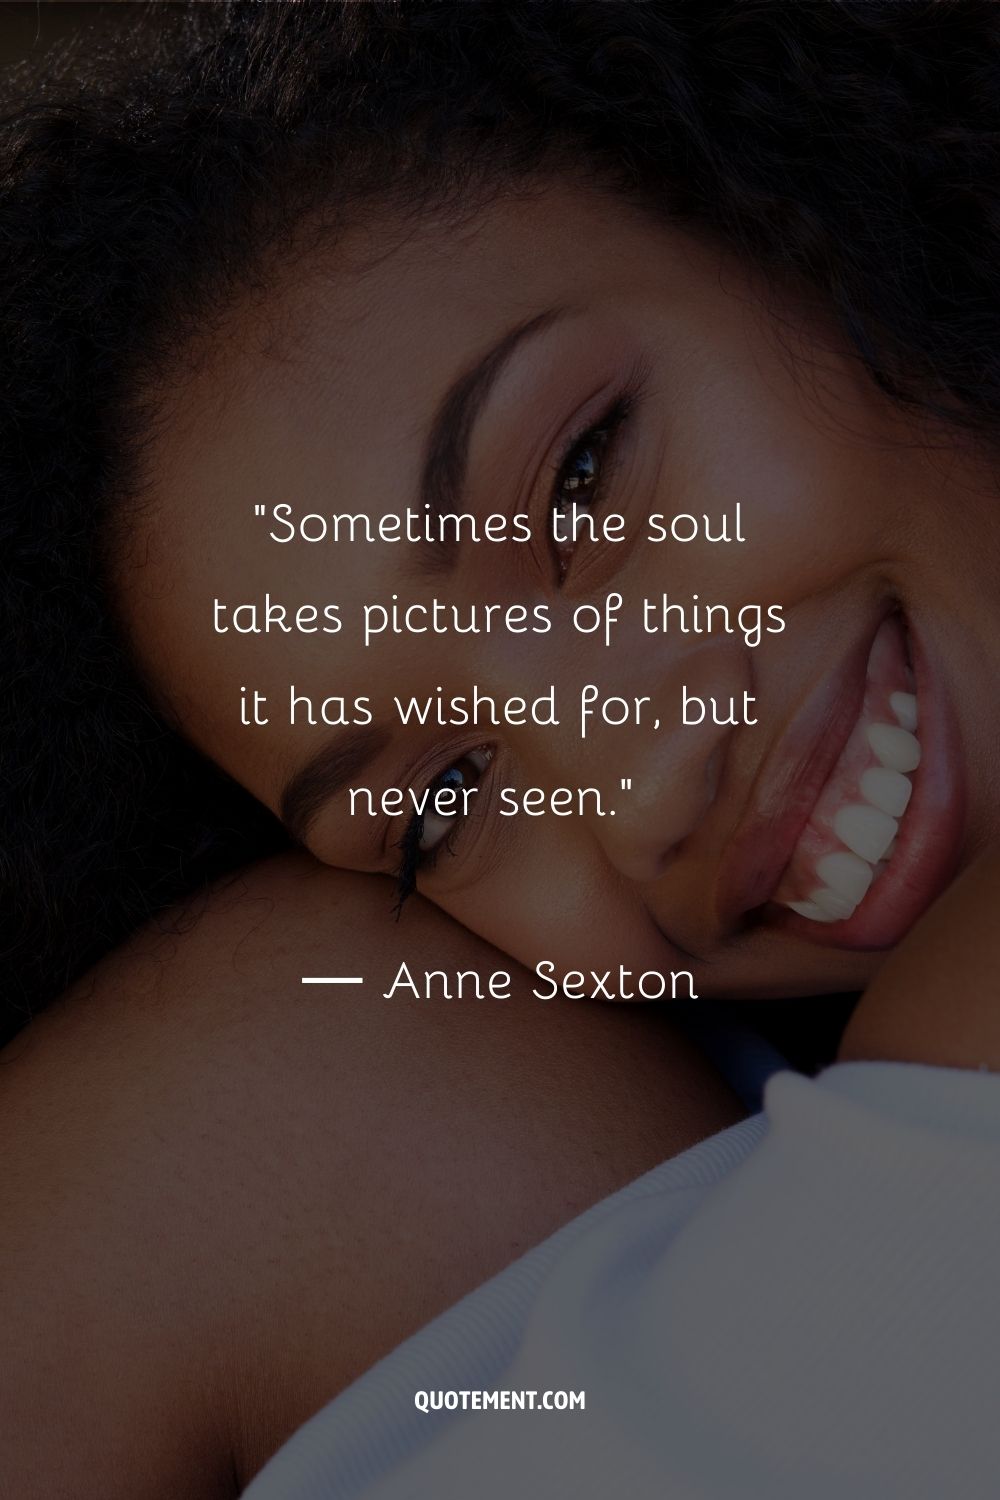 Sometimes the soul takes pictures of things it has wished for, but never seen